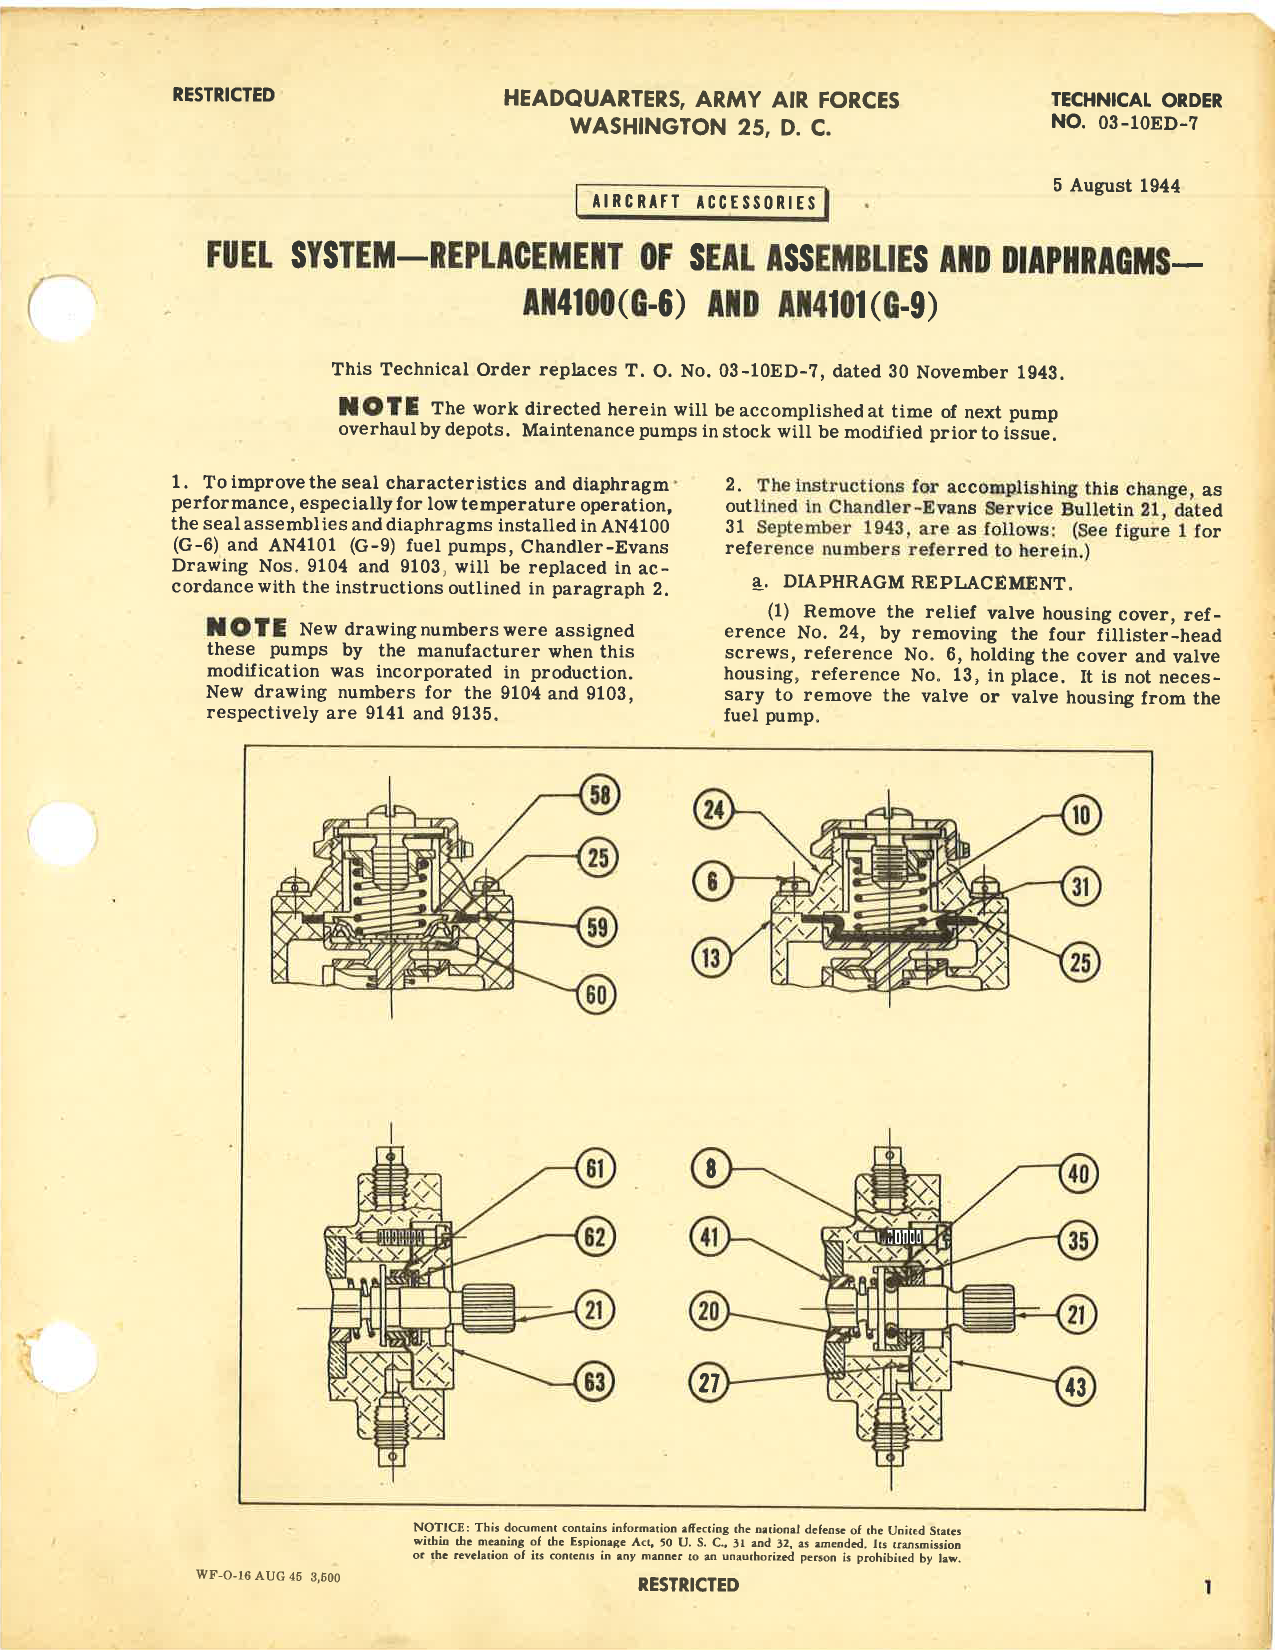 Sample page 1 from AirCorps Library document: Replacement of Seal Assemblies and Diaphragms in AN4100 (G-6) and AN4101 (G-9) Fuel Pumps